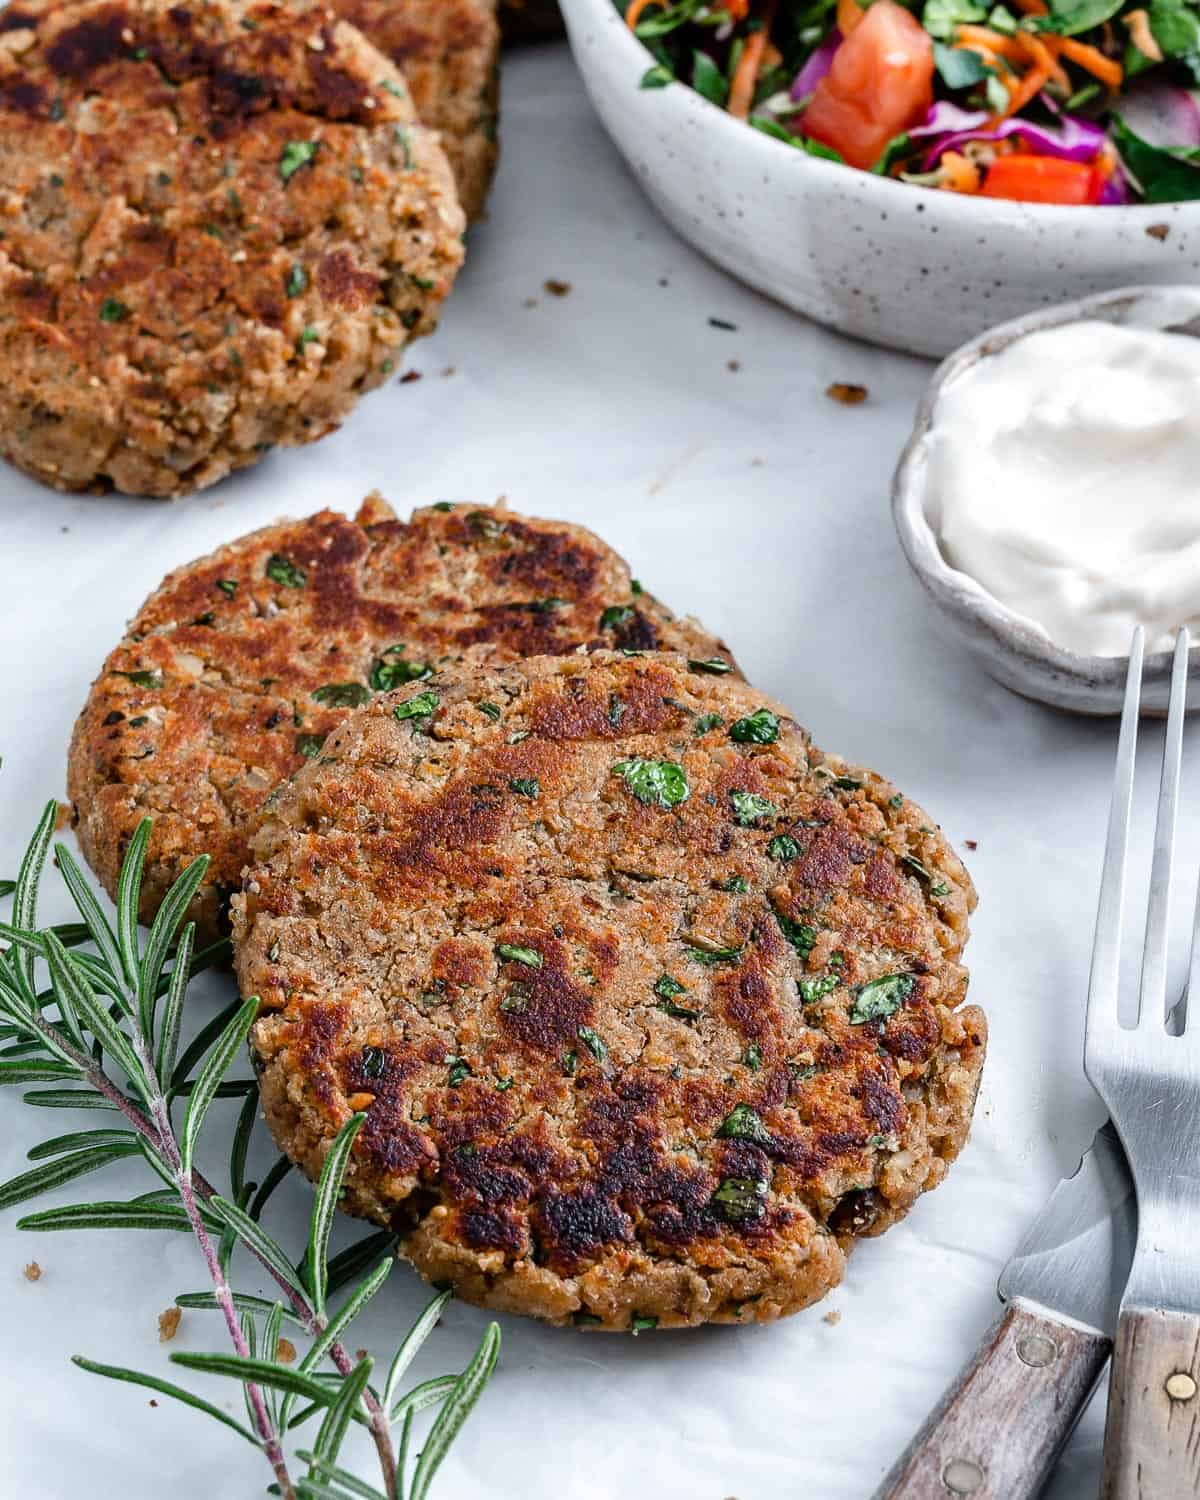 3 completed White Bean Burger patties against white surface